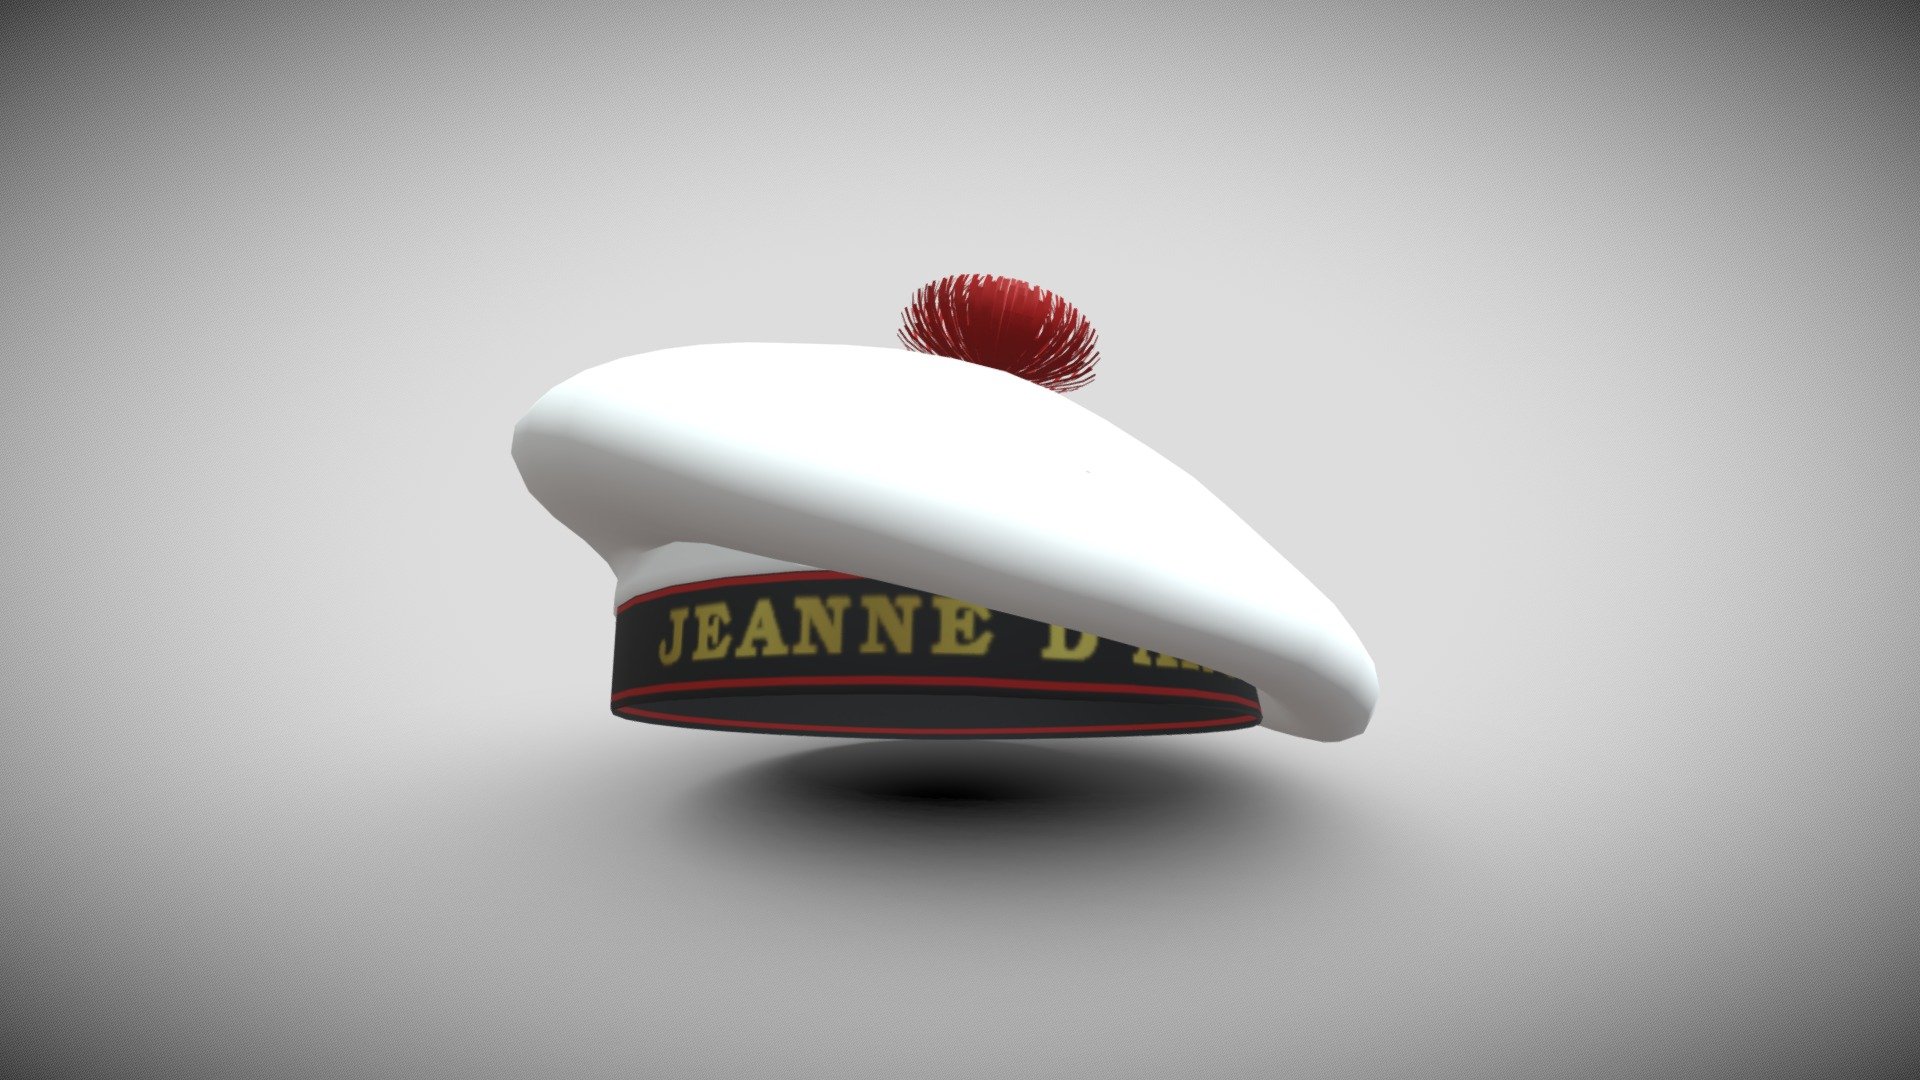 This is a French Navy sailor's cap. The logo on the ribbon reveals that it belongs to the &ldquo;Tactical Fleet Jeanne d'Arc